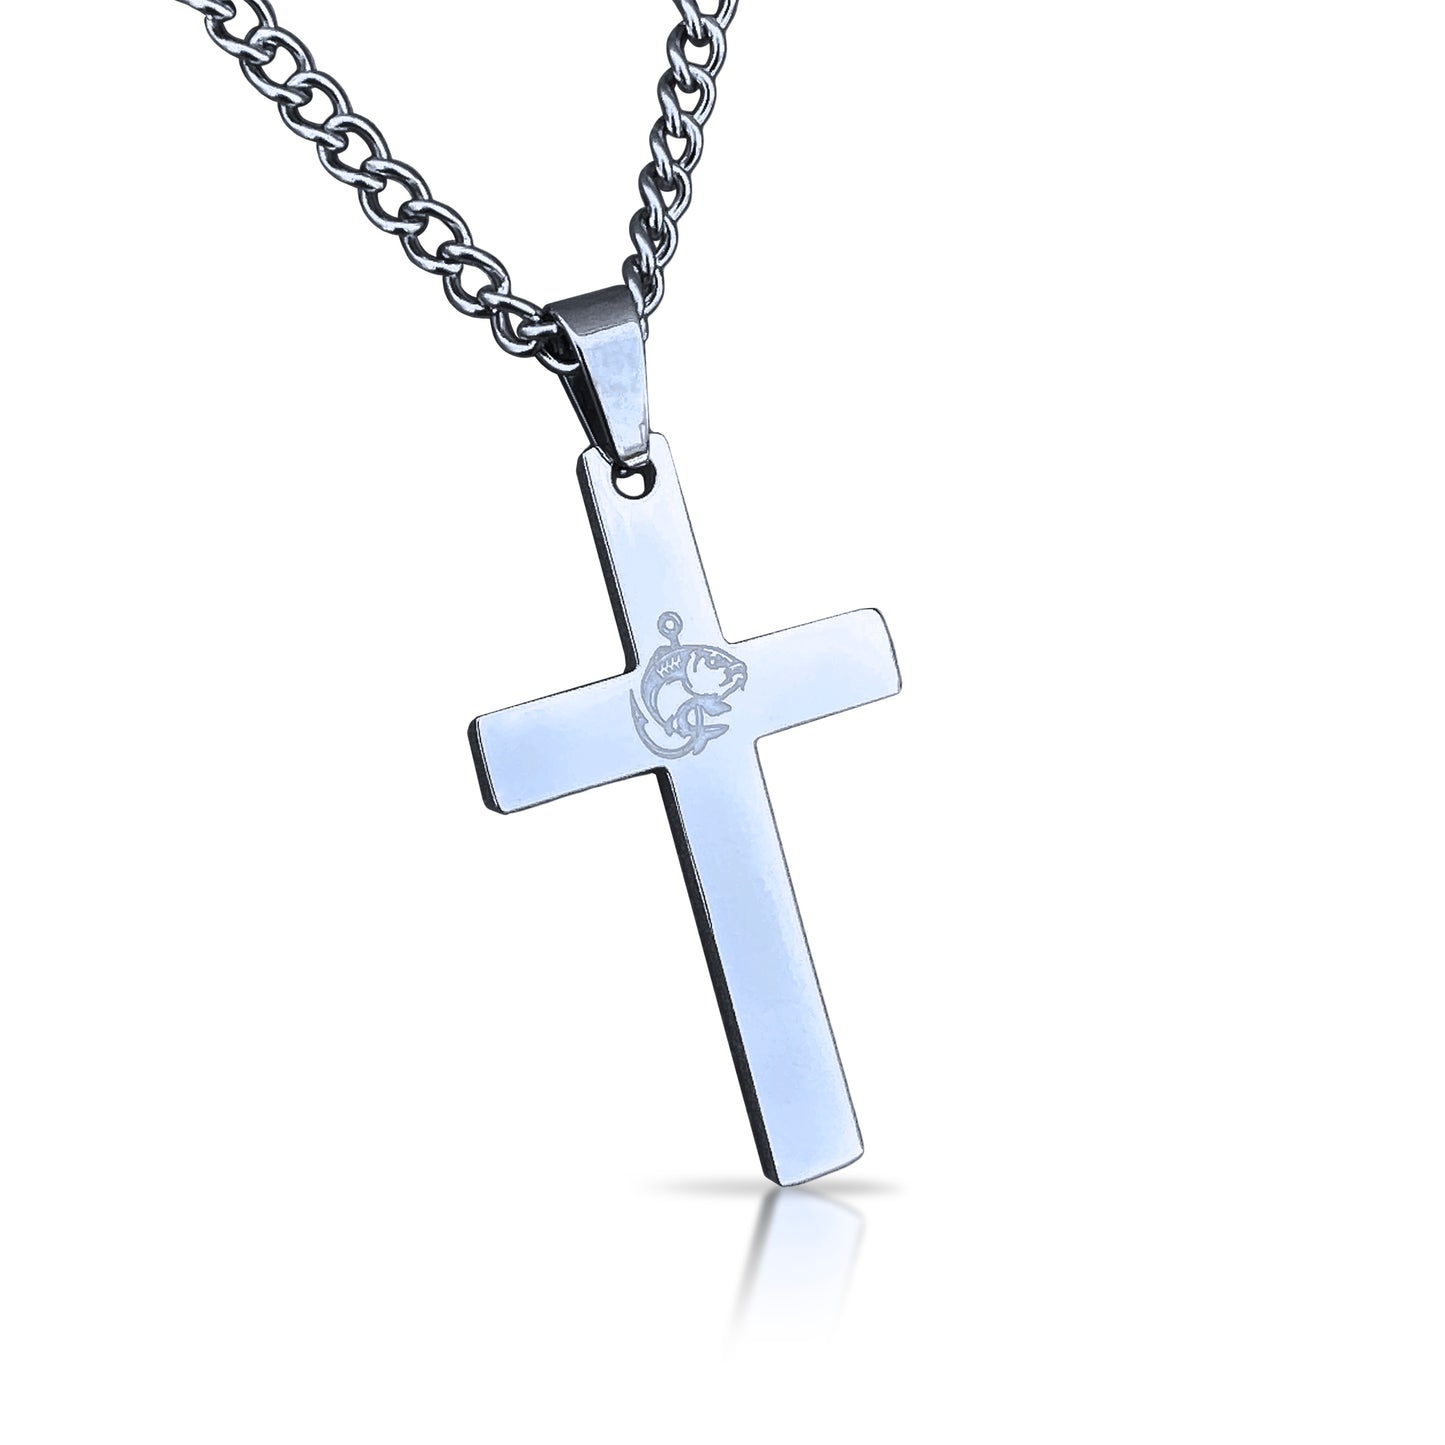 Fishing Cross Pendant With Chain Necklace - Stainless Steel